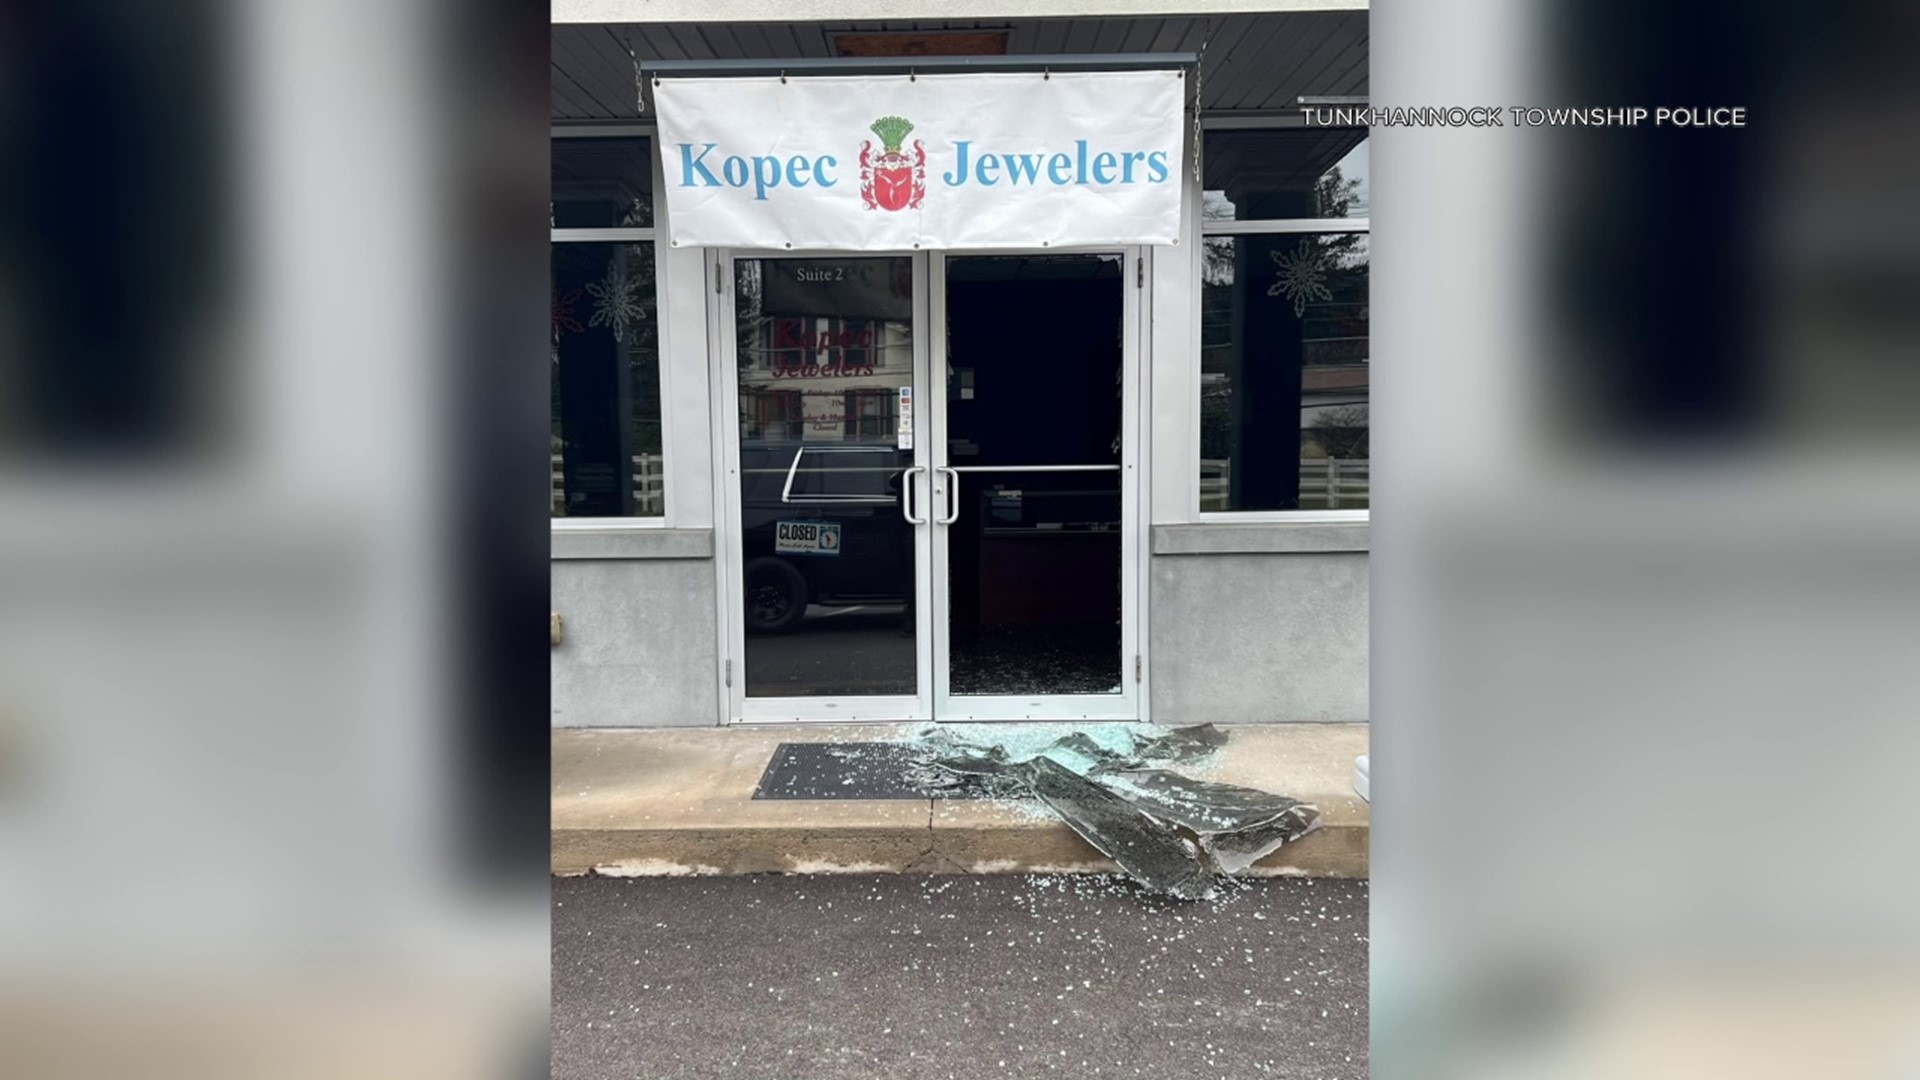 Officers say someone smashed the front door of Kopec Jewelers near Tunkhannock sometime between 11 p.m. Wednesday night and 7 a.m. Thursday morning.